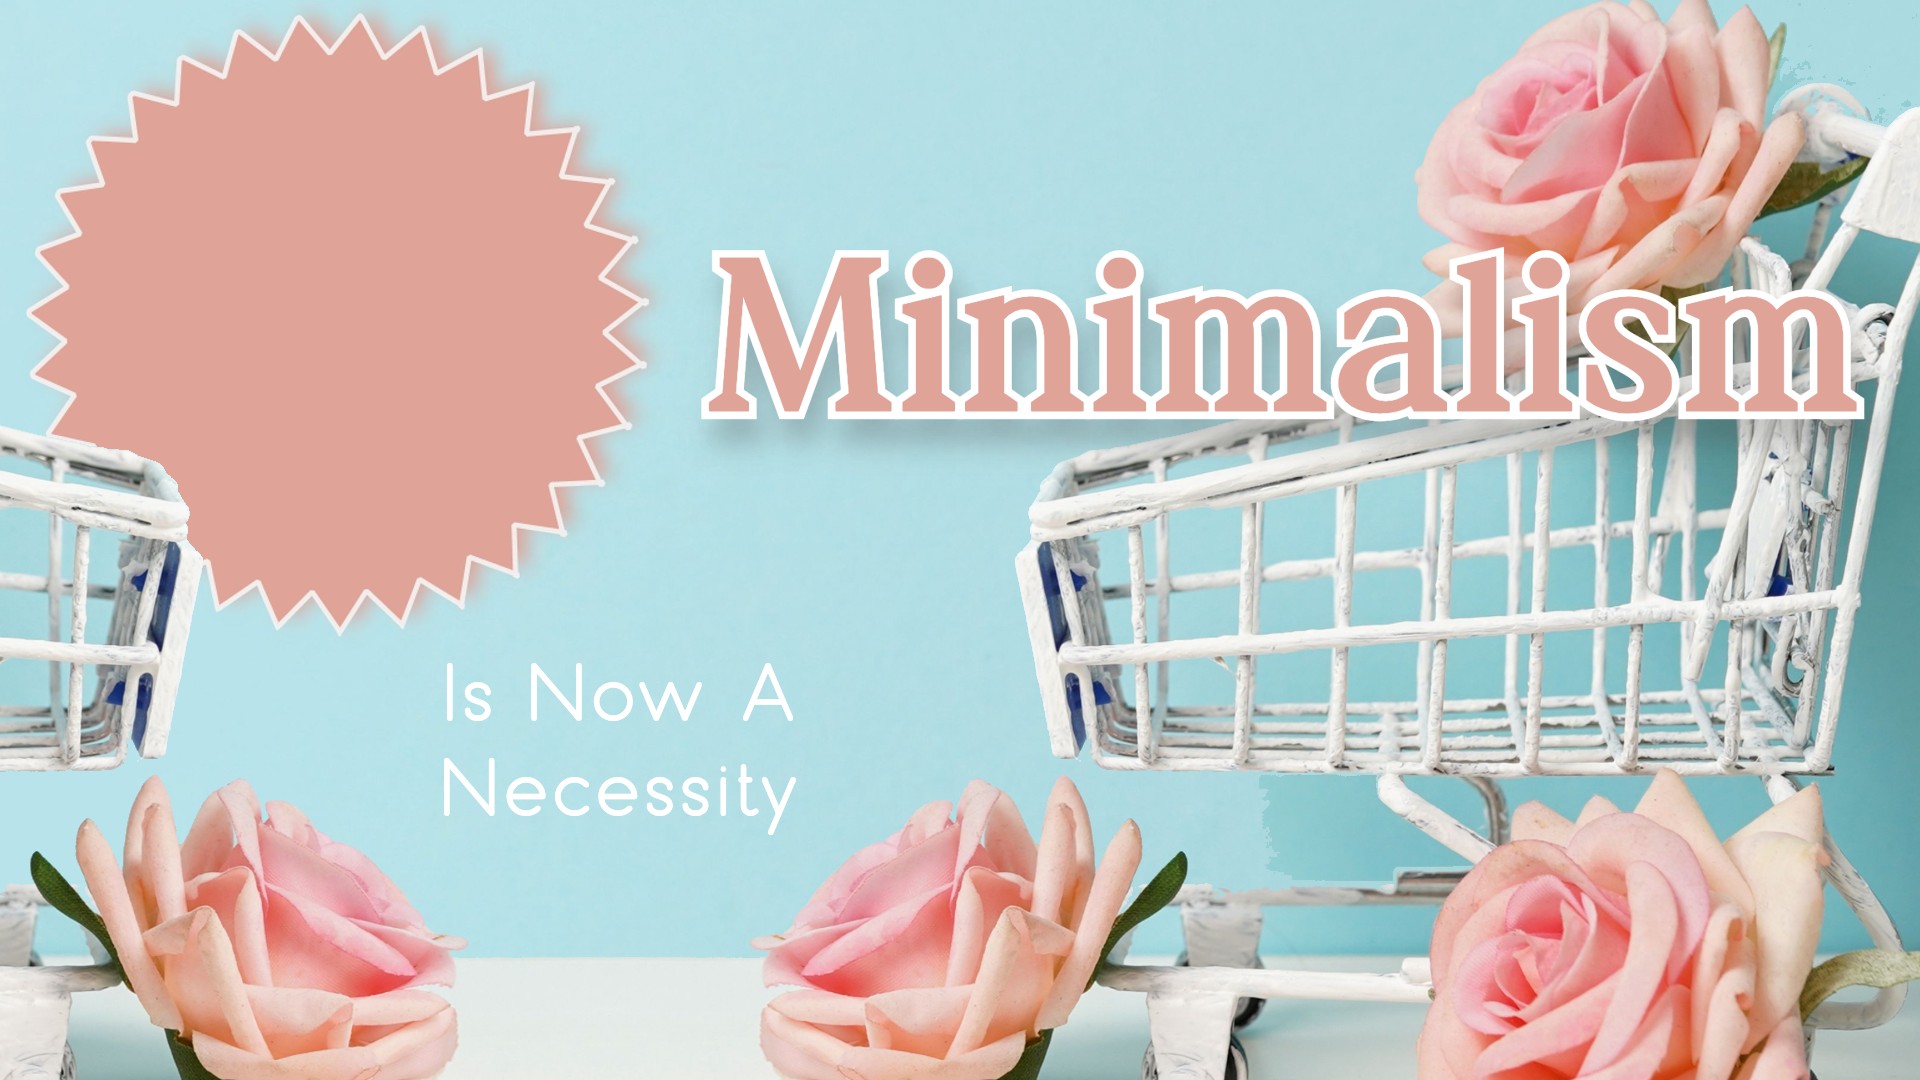 Minimalism is Now a Necessity